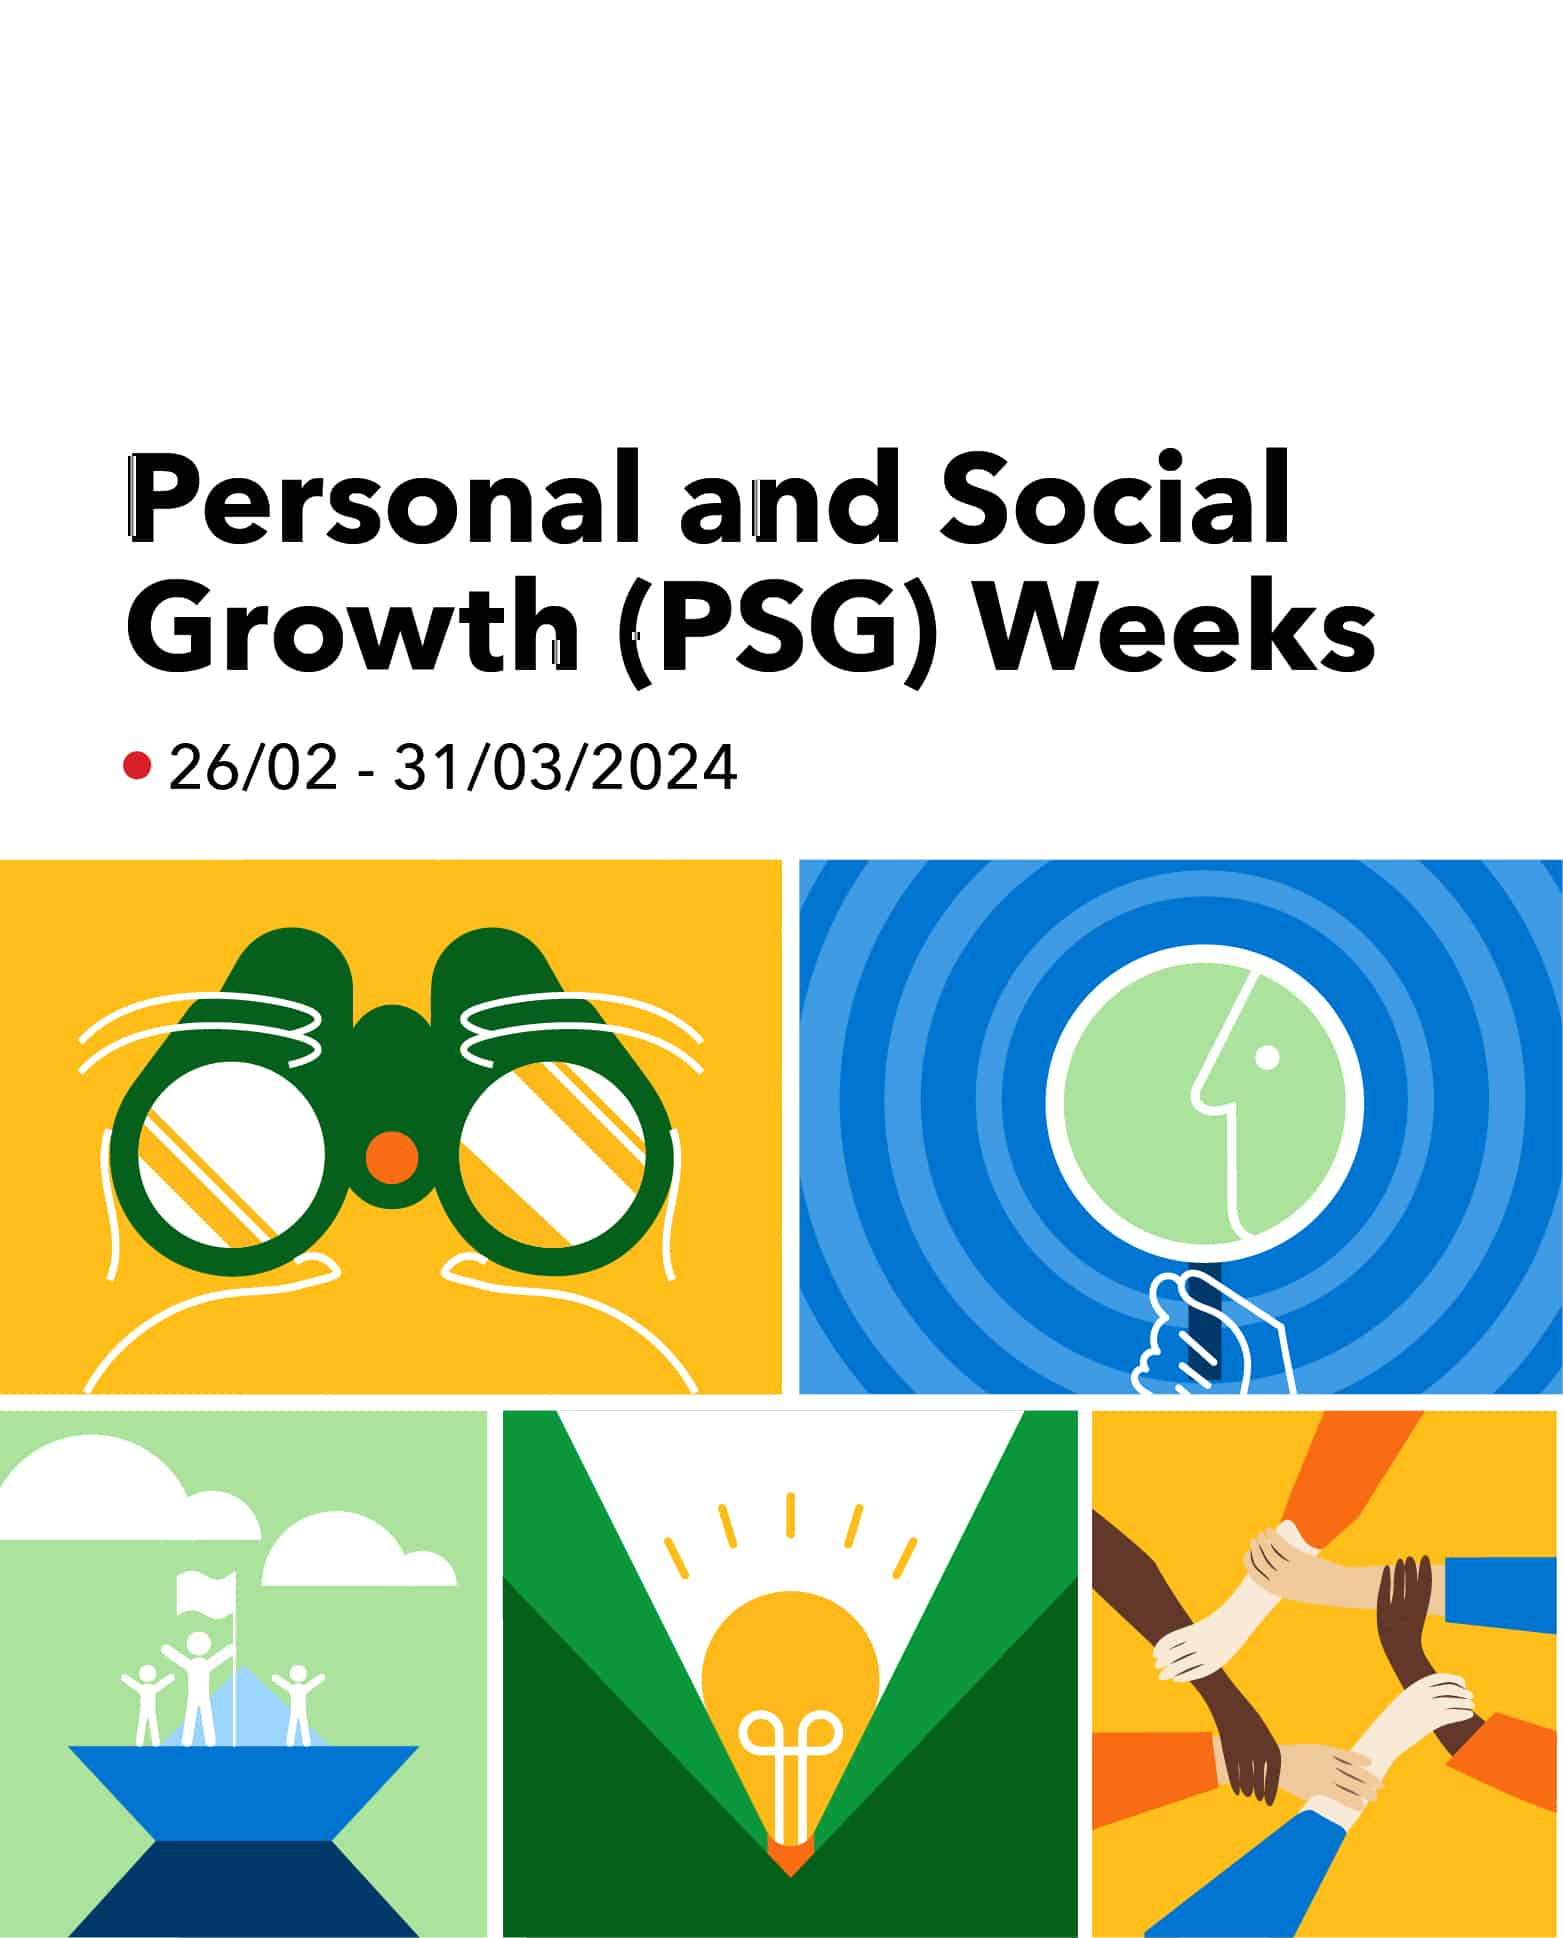 Personal and Social Growth (PSG) Weeks